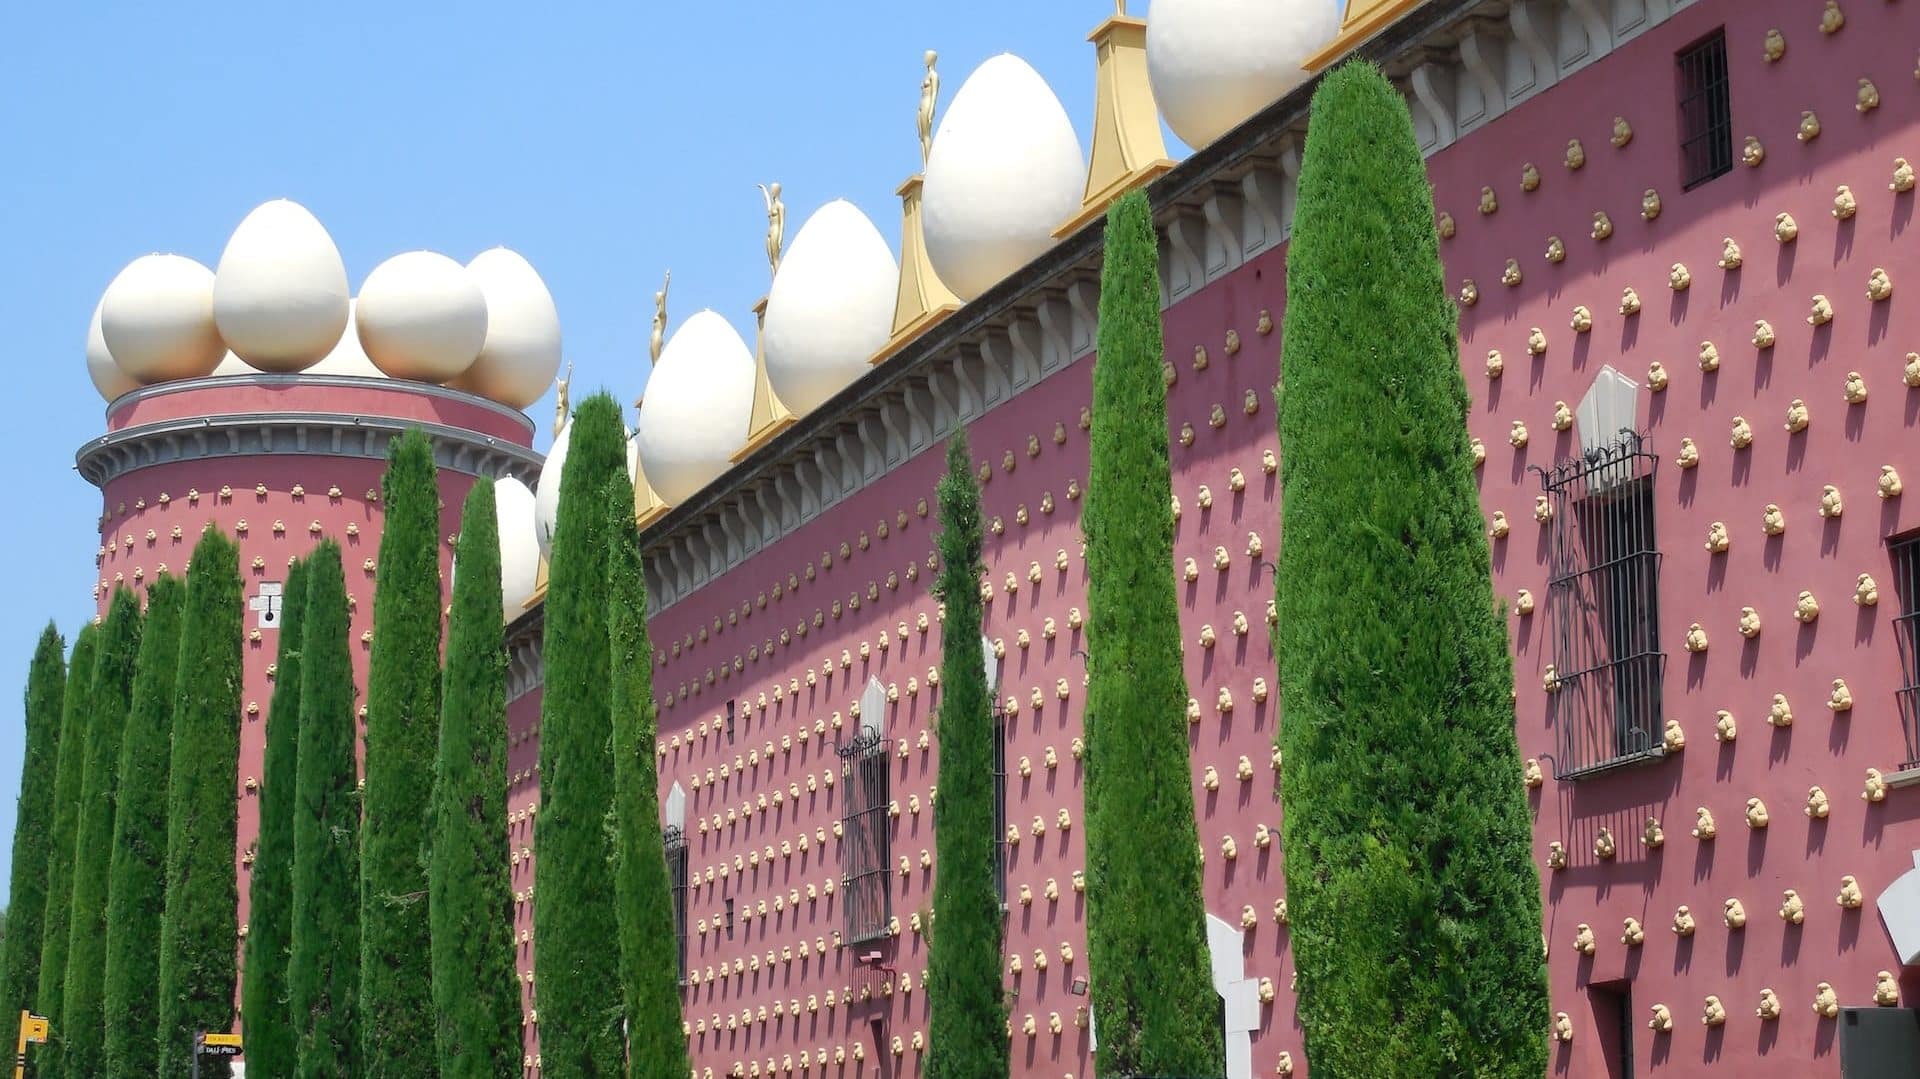 Teatro-Museo Dalí, Figueres, Catalunya